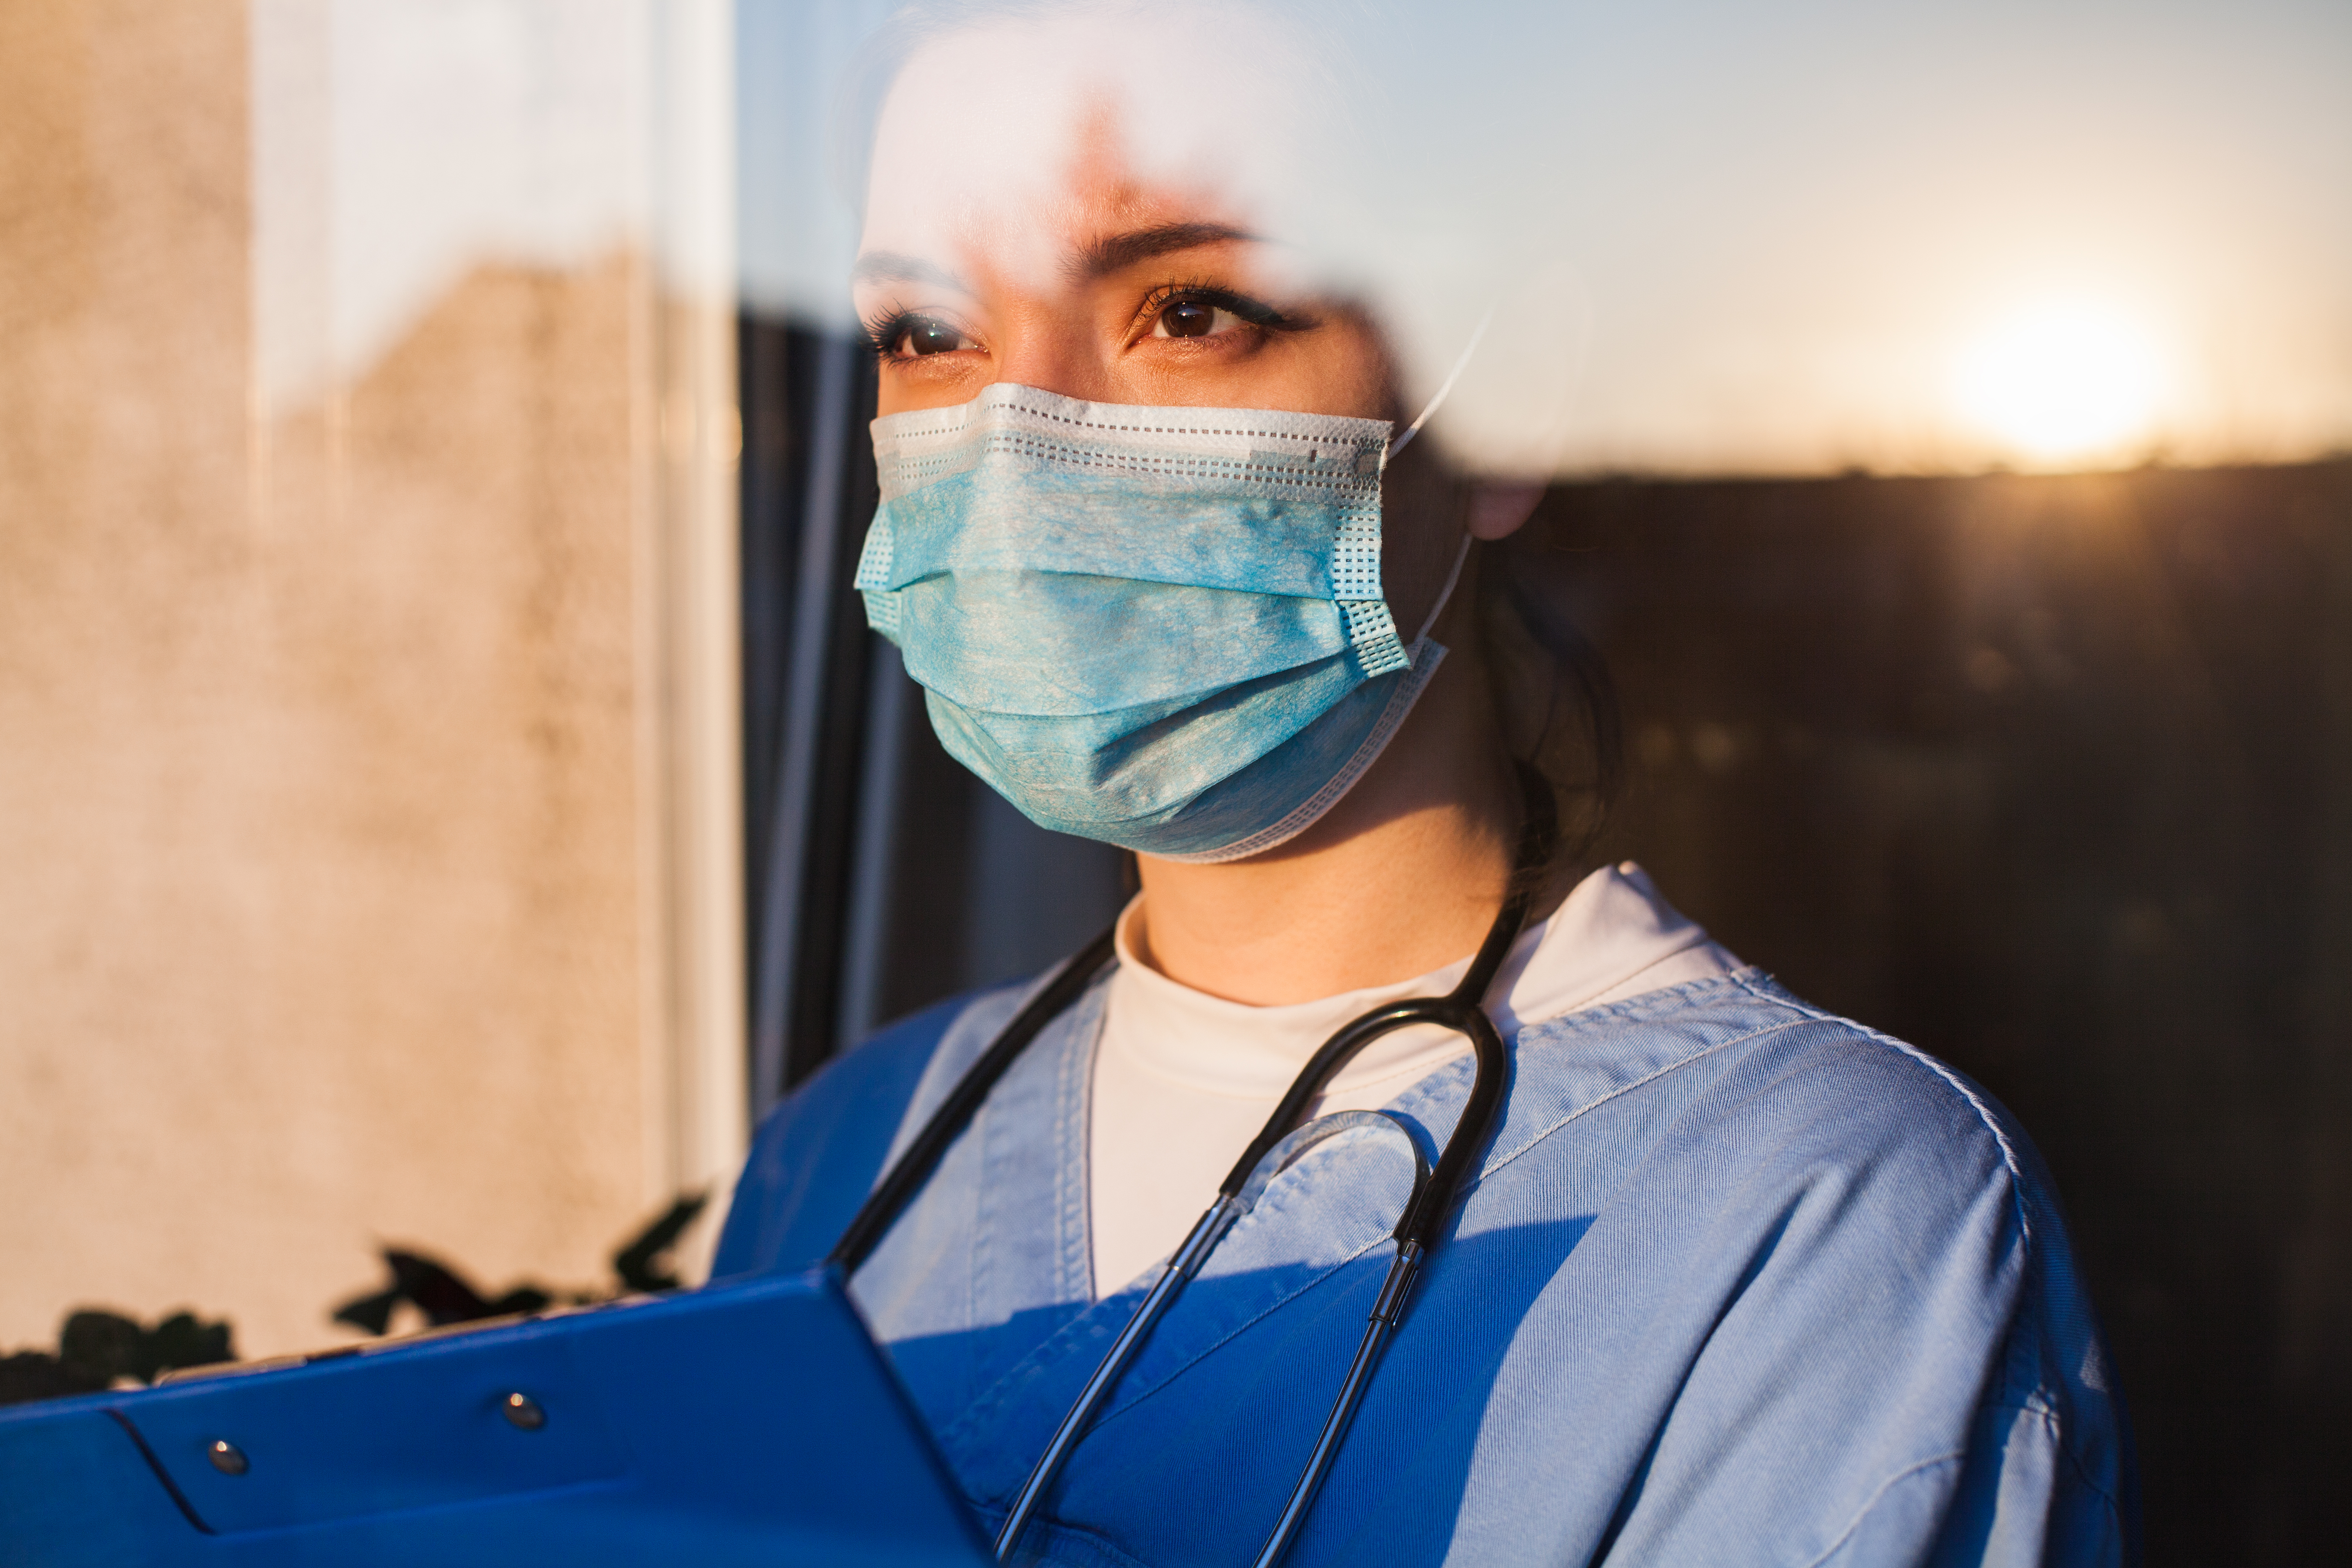 A nurse staring outside as she contemplates her life | Source: Shutterstock